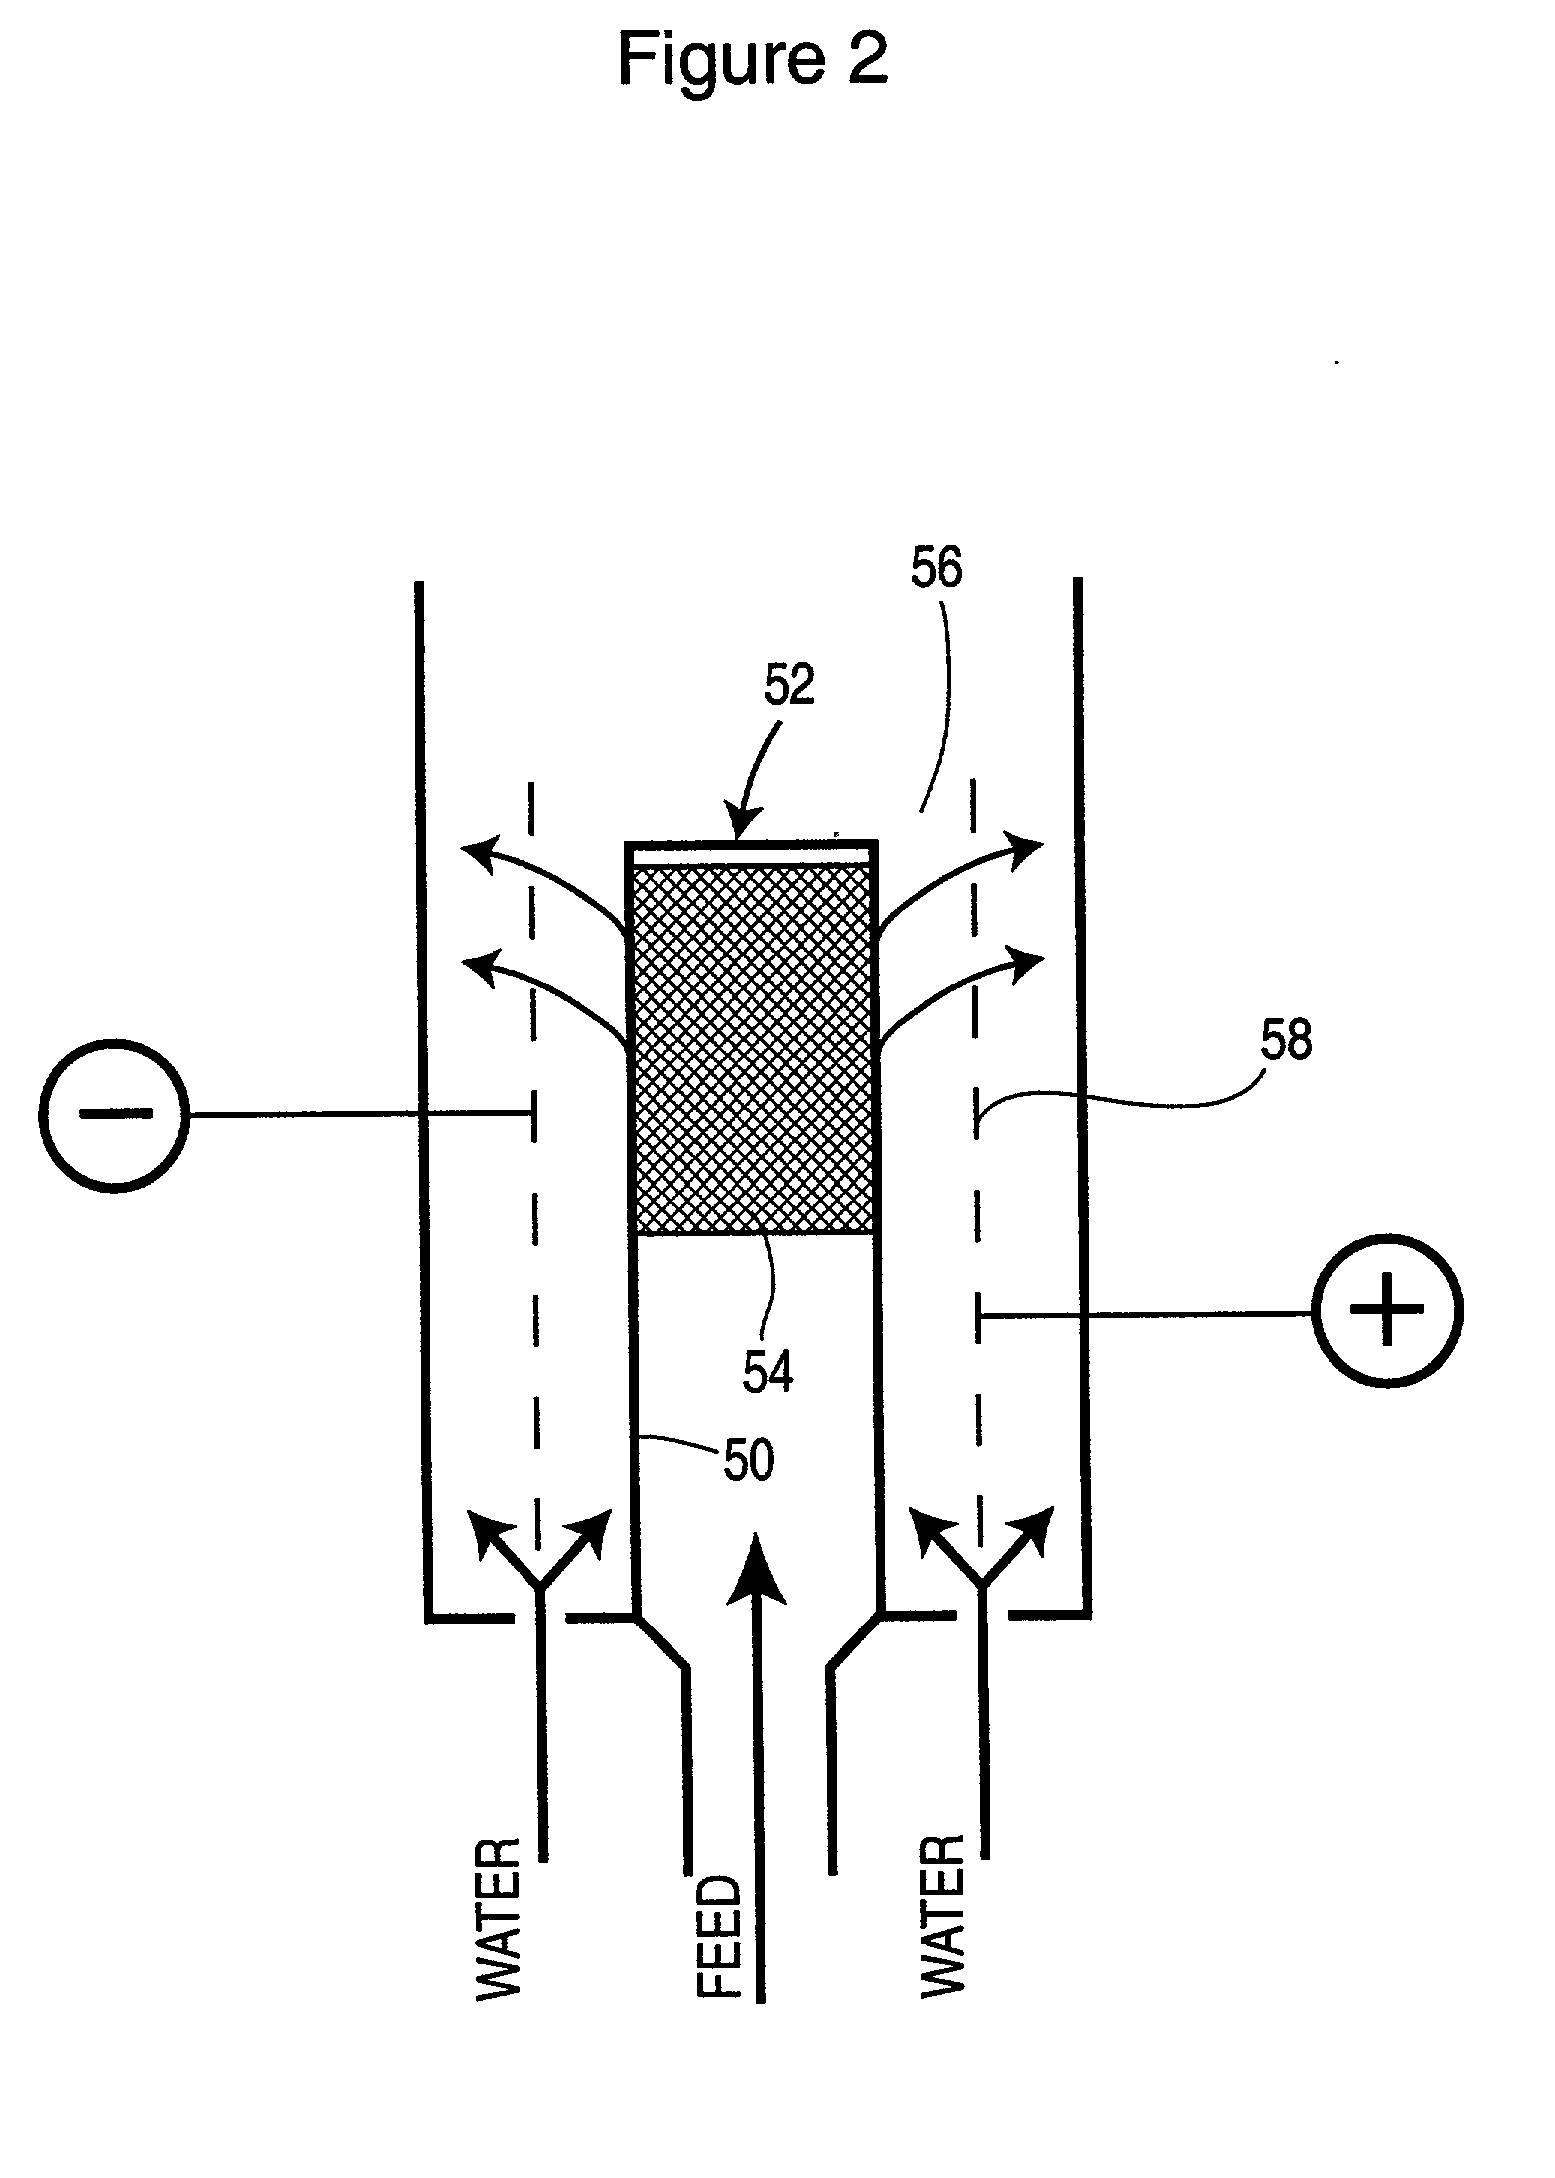 Electrolytic process for the production of chlorine dioxide